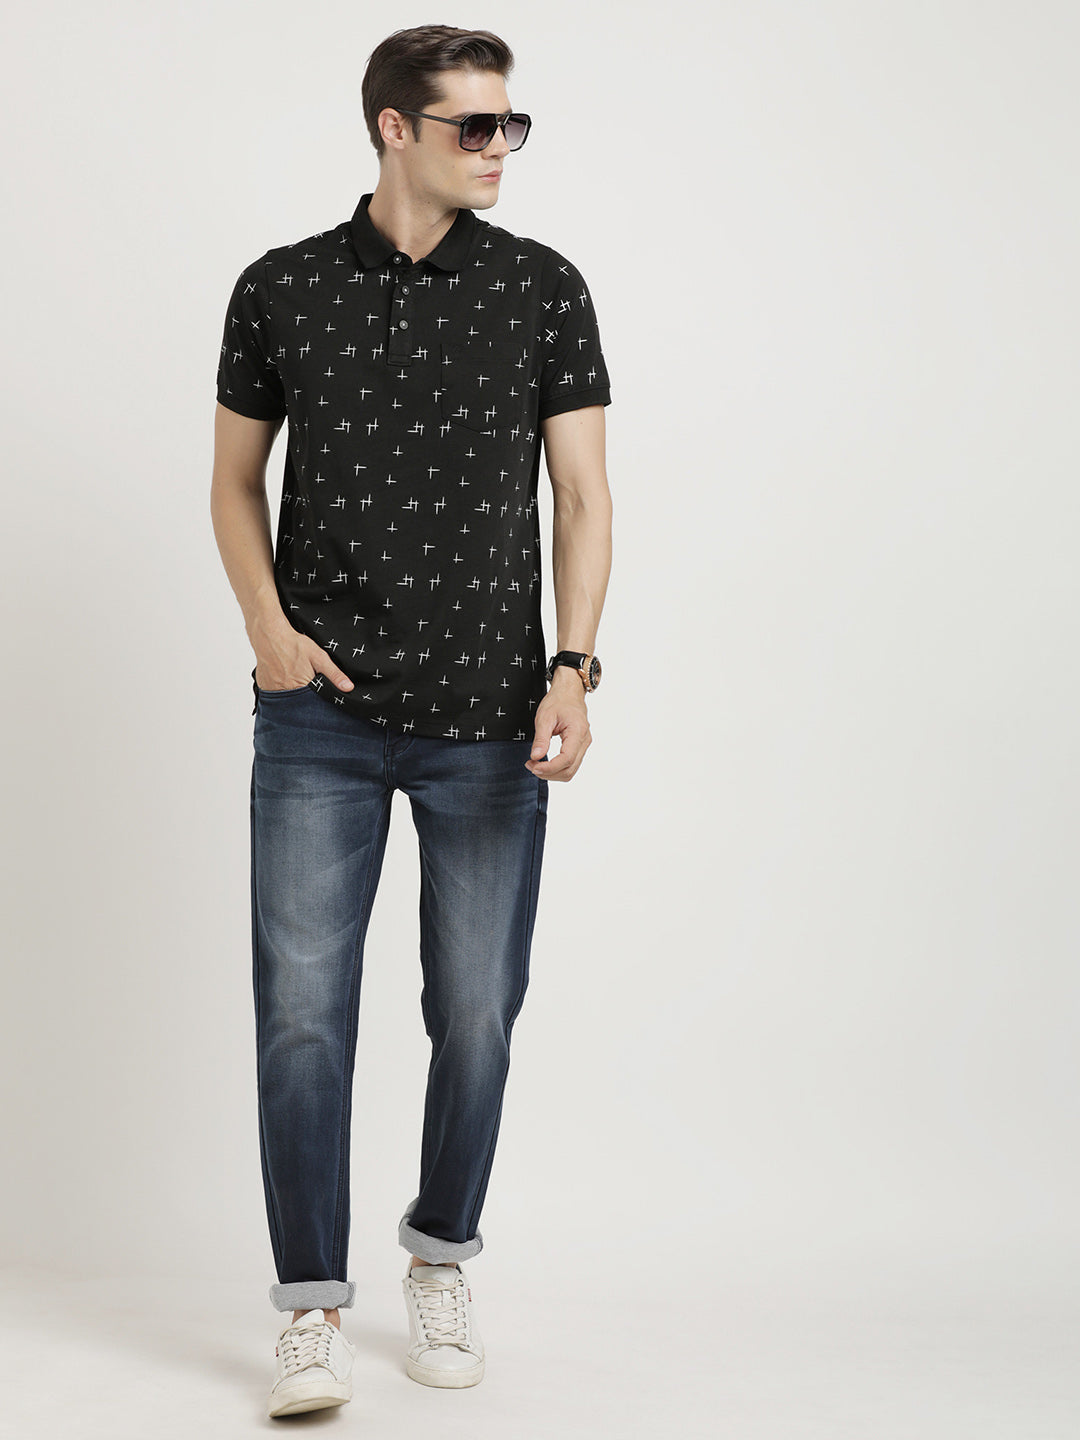 Cotton Stretch Black Printed Polo Neck Half Sleeve Casual T-Shirt